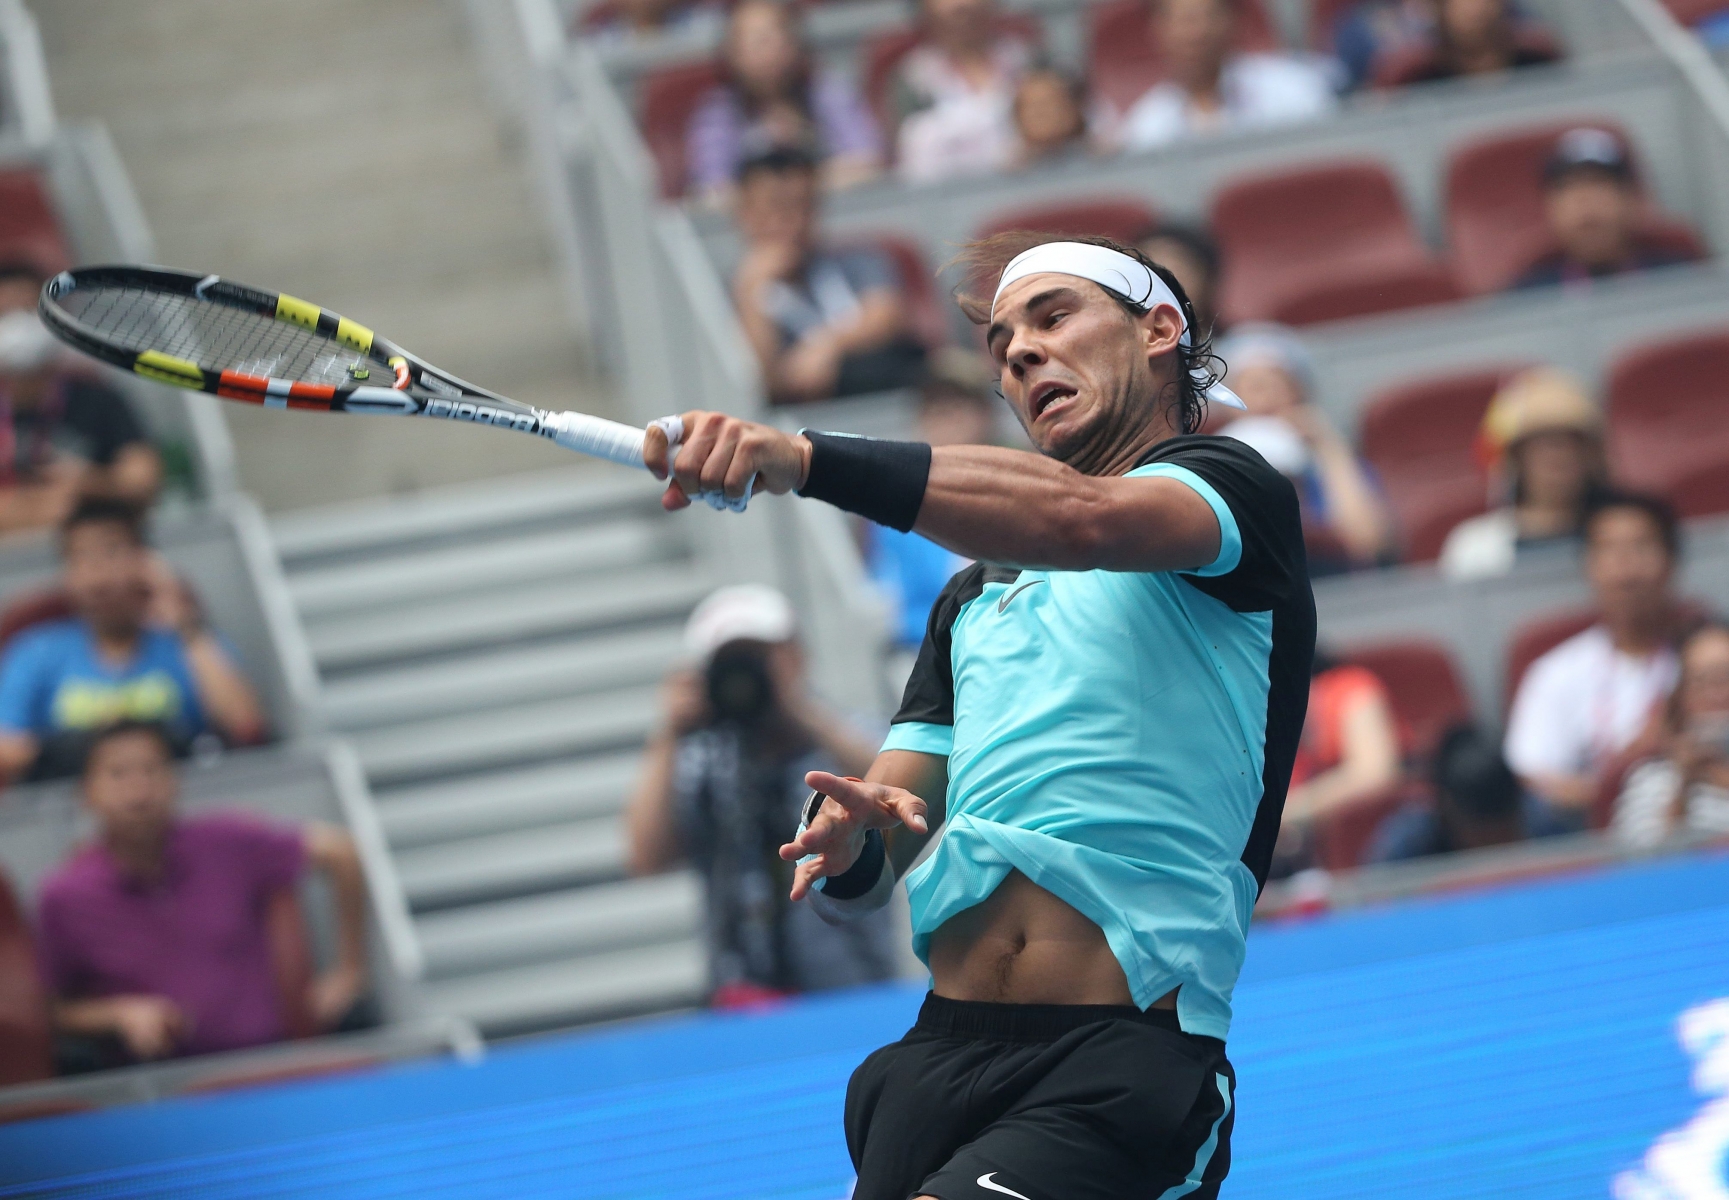 epa04965360 Rafael Nadal of Spain in action against Wu Di of China during their first round match in the China Open tennis tournament at the National Tennis Center in Beijing, China, 06 October 2015.  EPA/HOW HWEE YOUNG